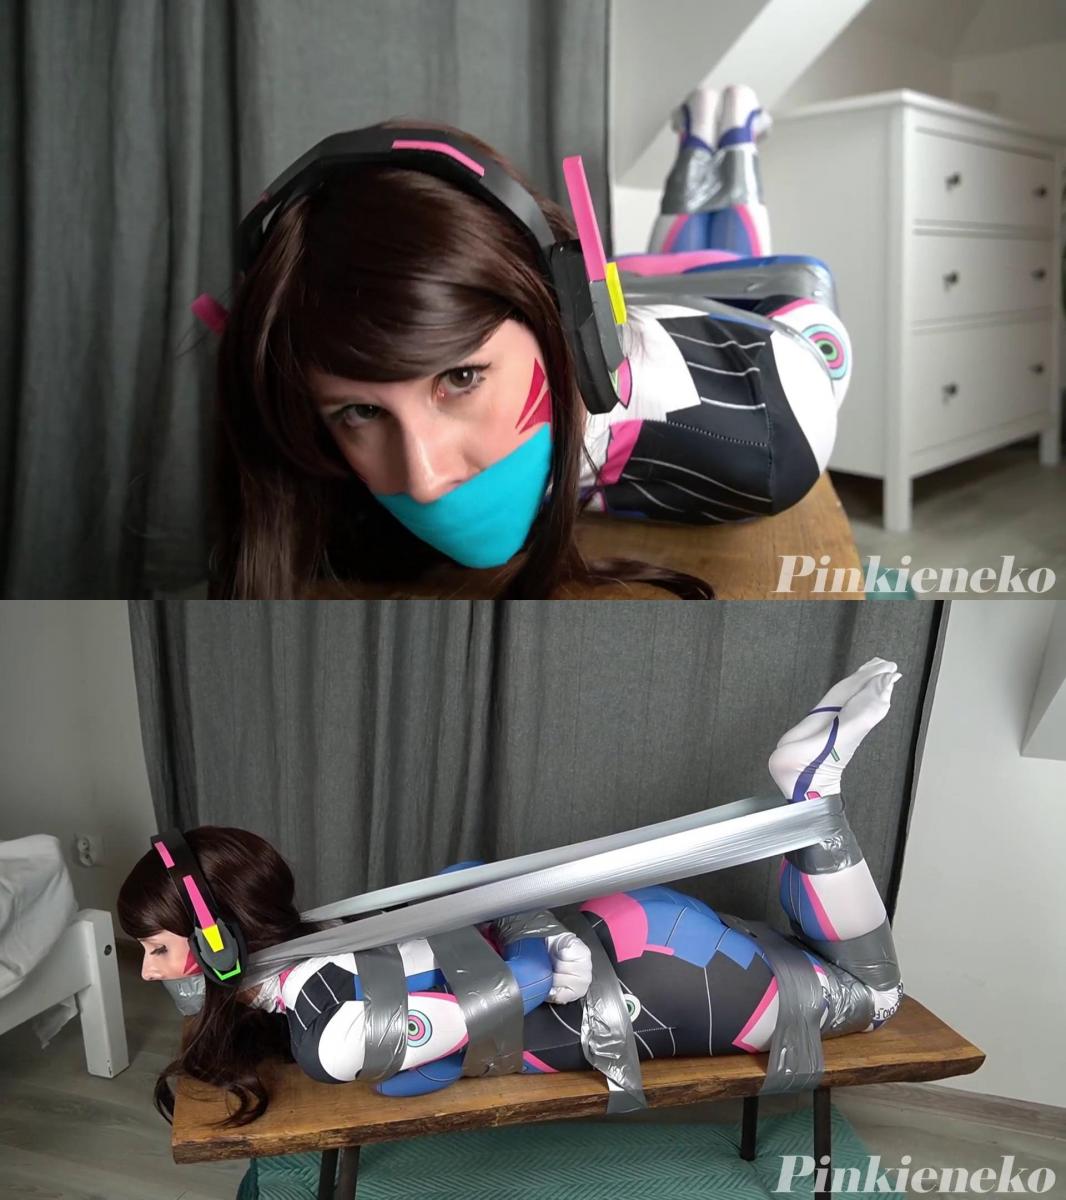  D.Va Taped Up VIDEO 《守望先锋》的 DV.a 被贴在长凳上，并用肌内效胶带堵住嘴。 DV.a from Overwatch is taped to bench and gagged with kinesio tape.